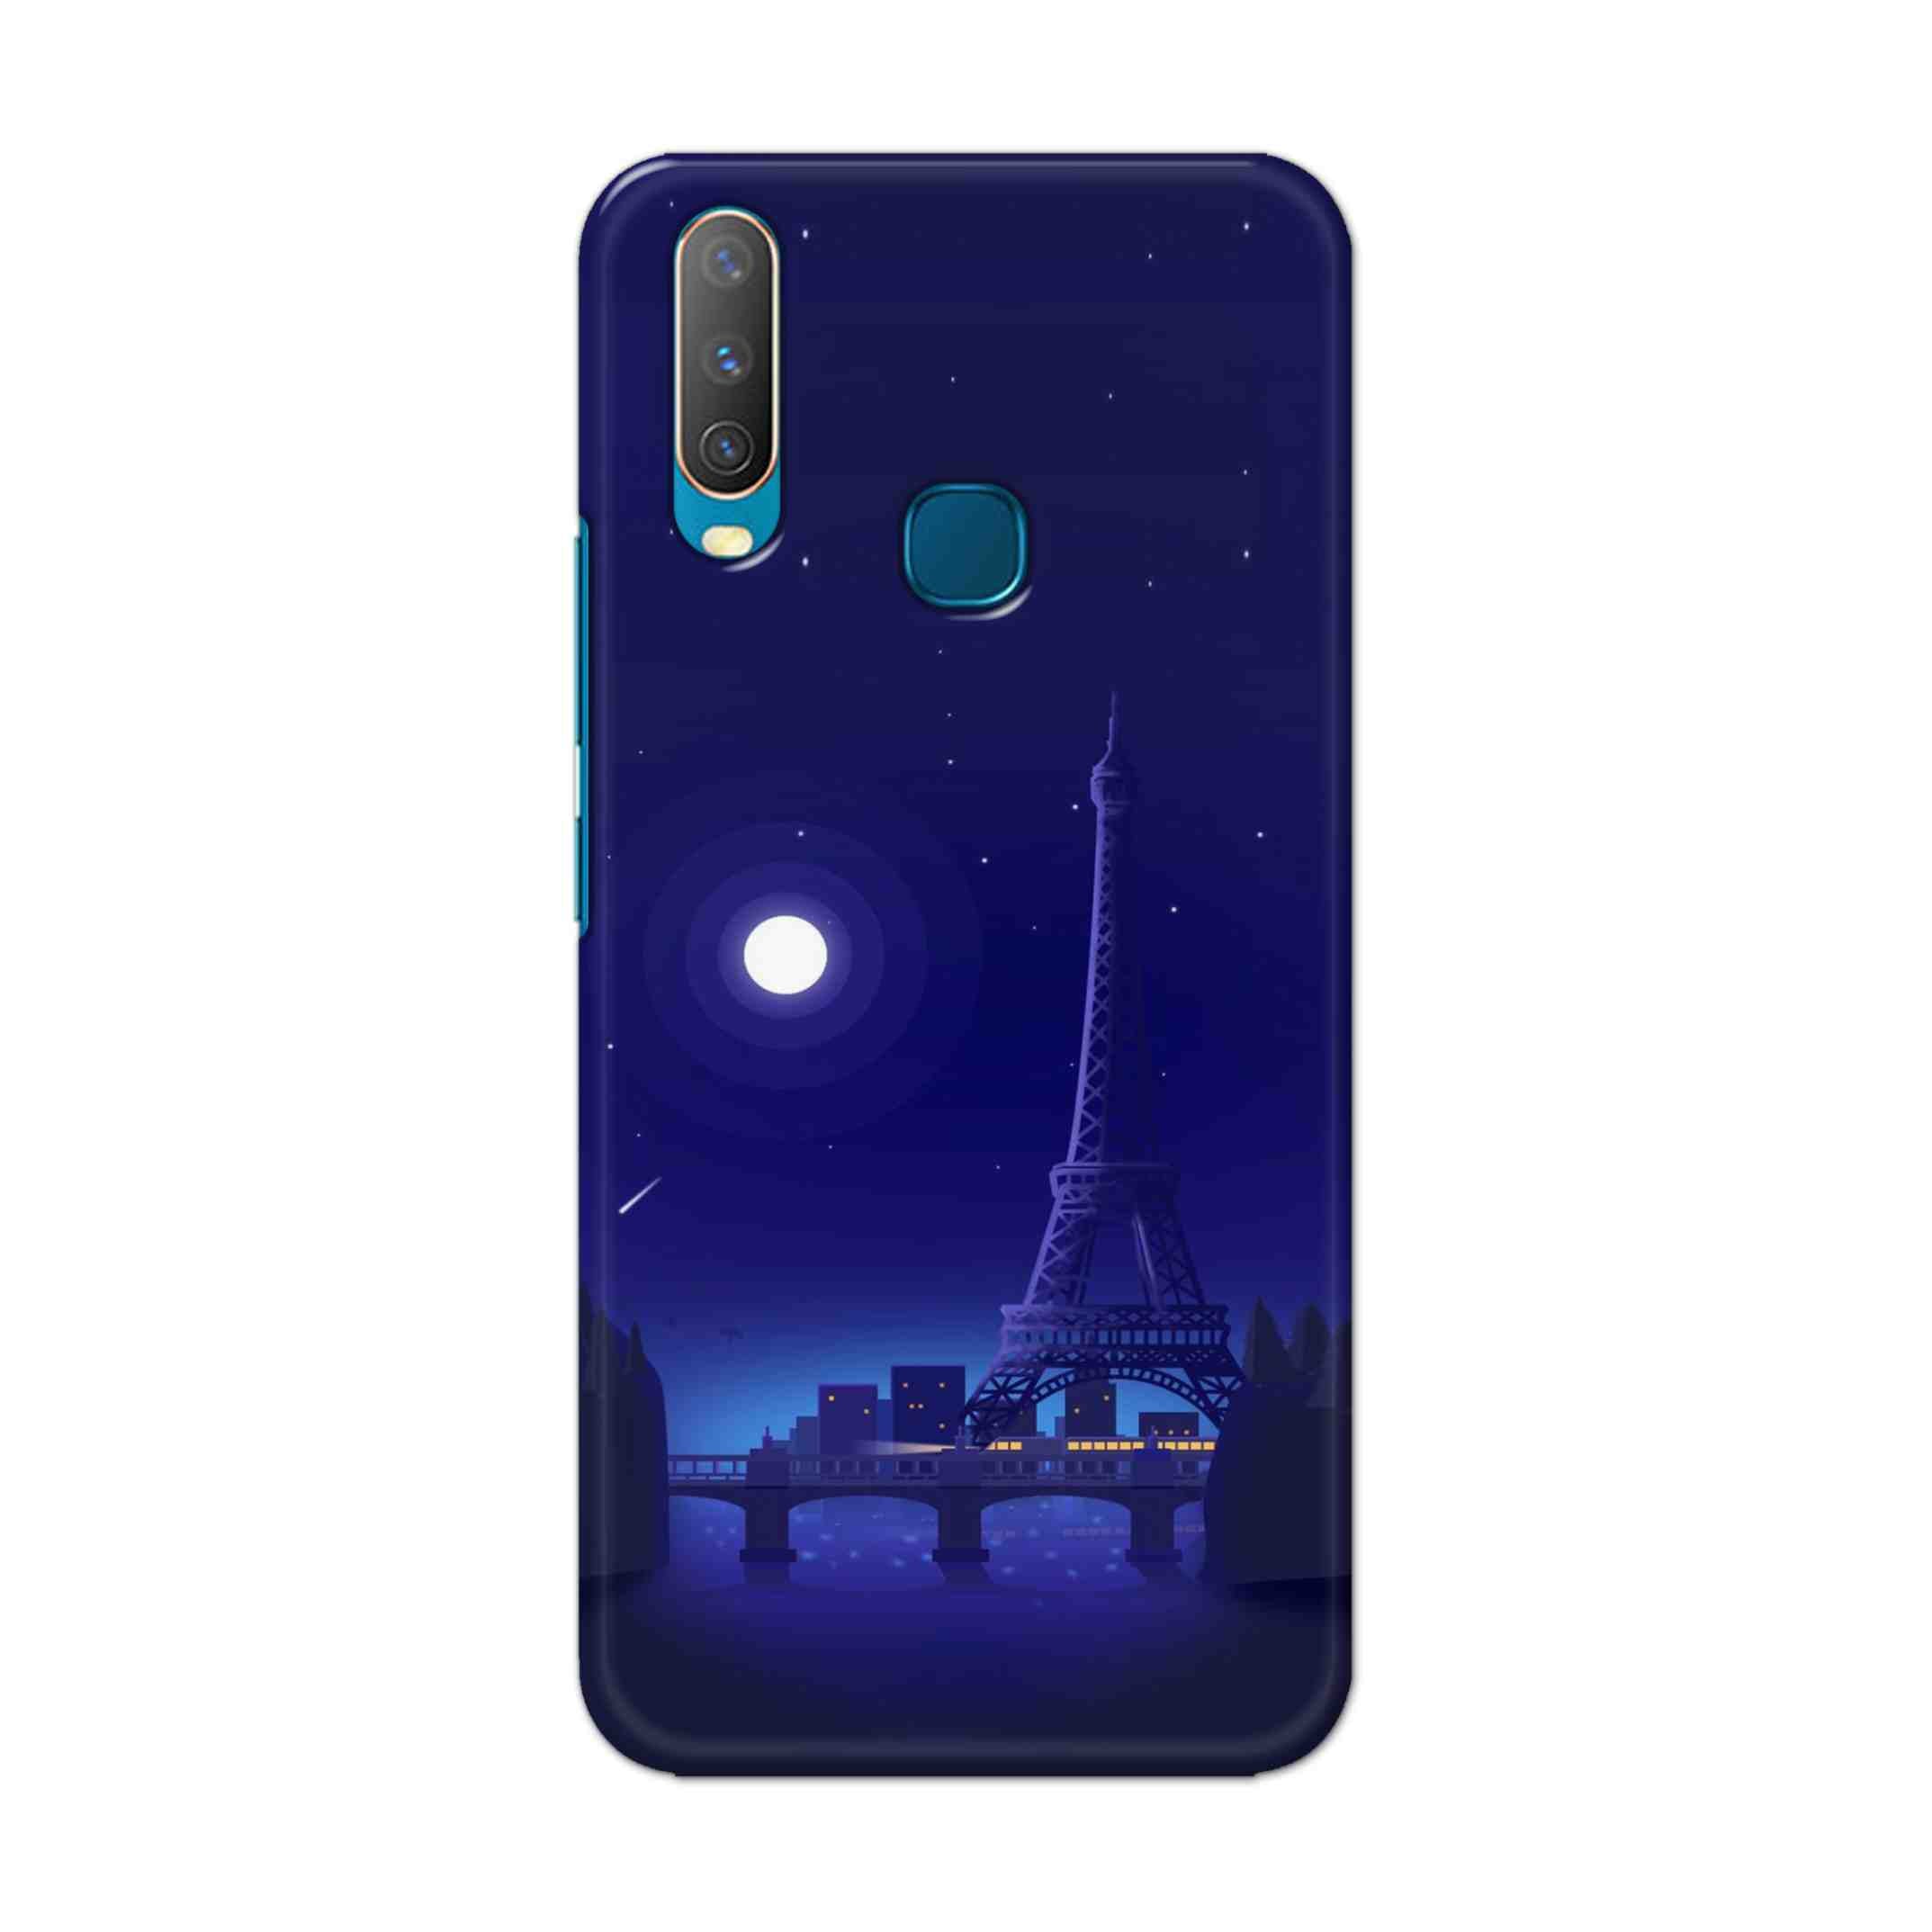 Buy Night Eiffel Tower Hard Back Mobile Phone Case Cover For Vivo Y17 / U10 Online